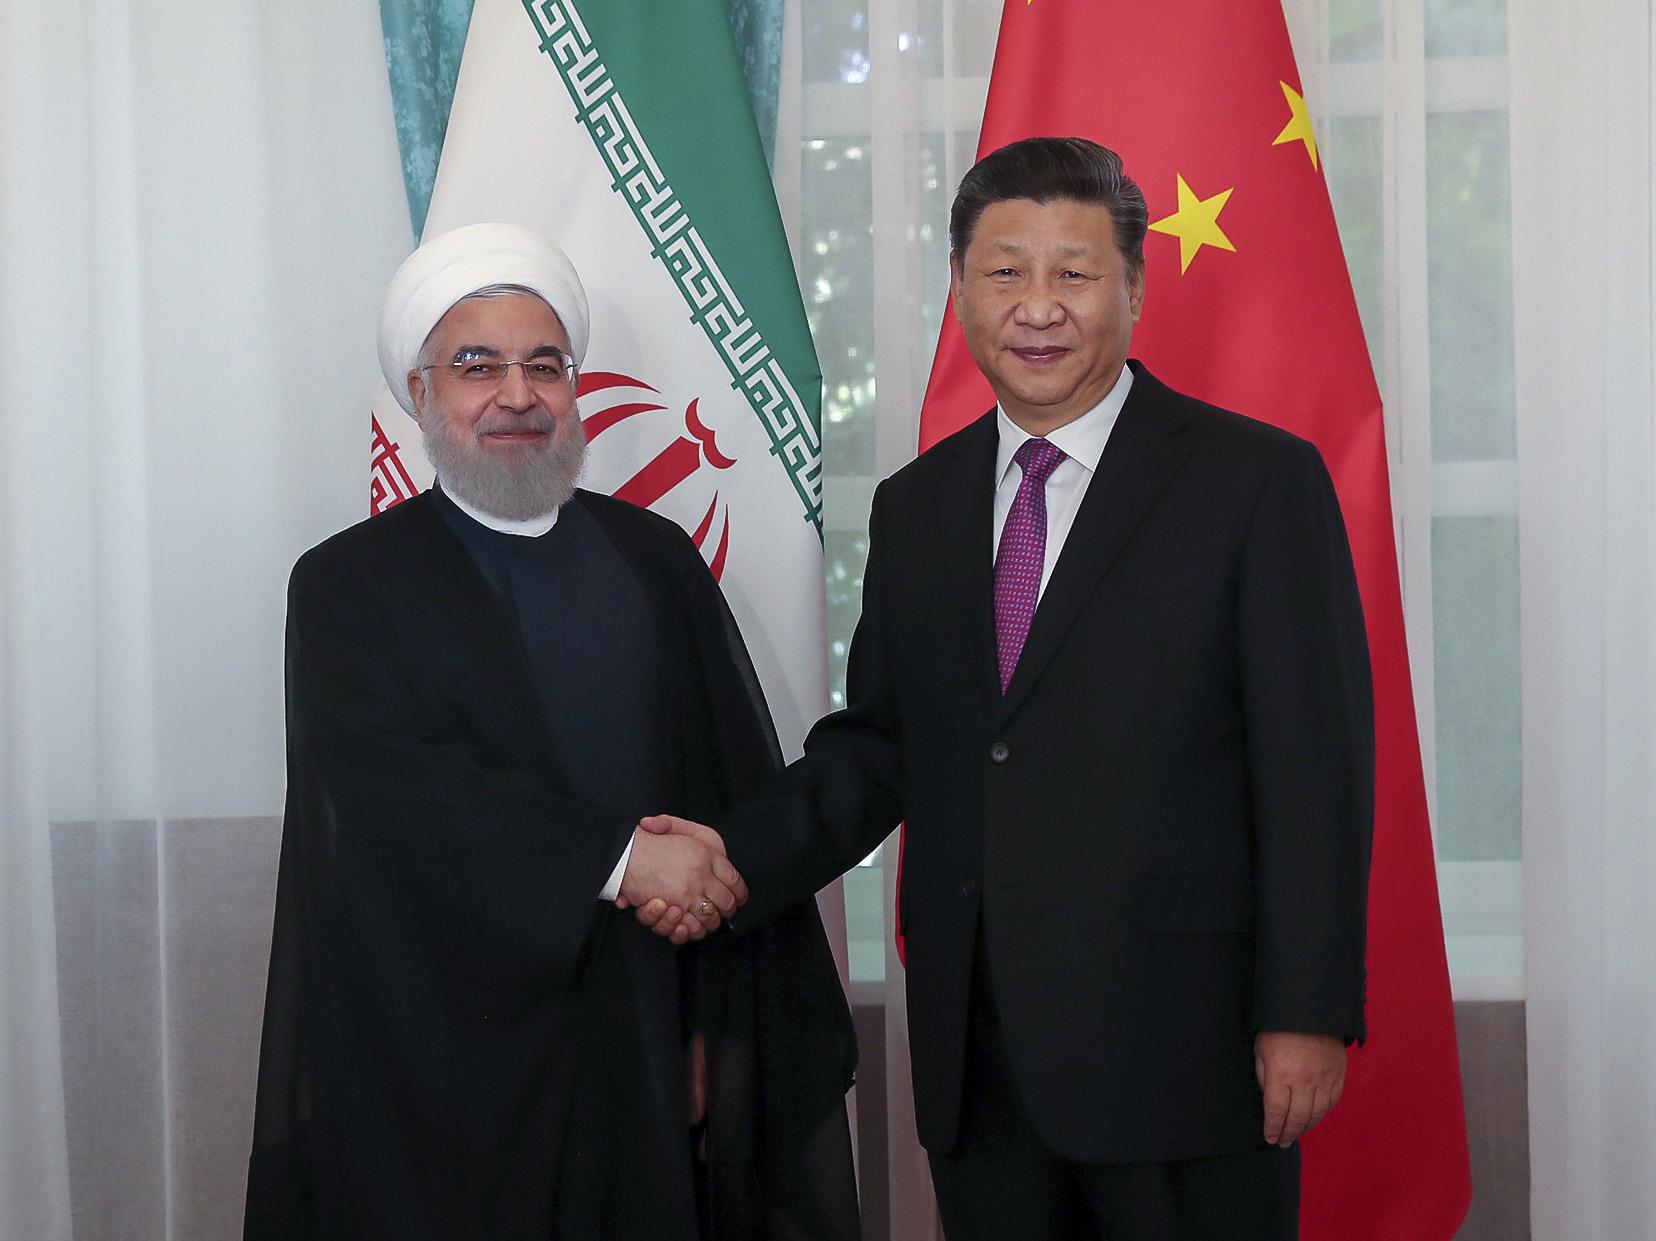 Partnership has been approved by the government of president Rouhani [left], pictured here meeting with Xi Jinping last year